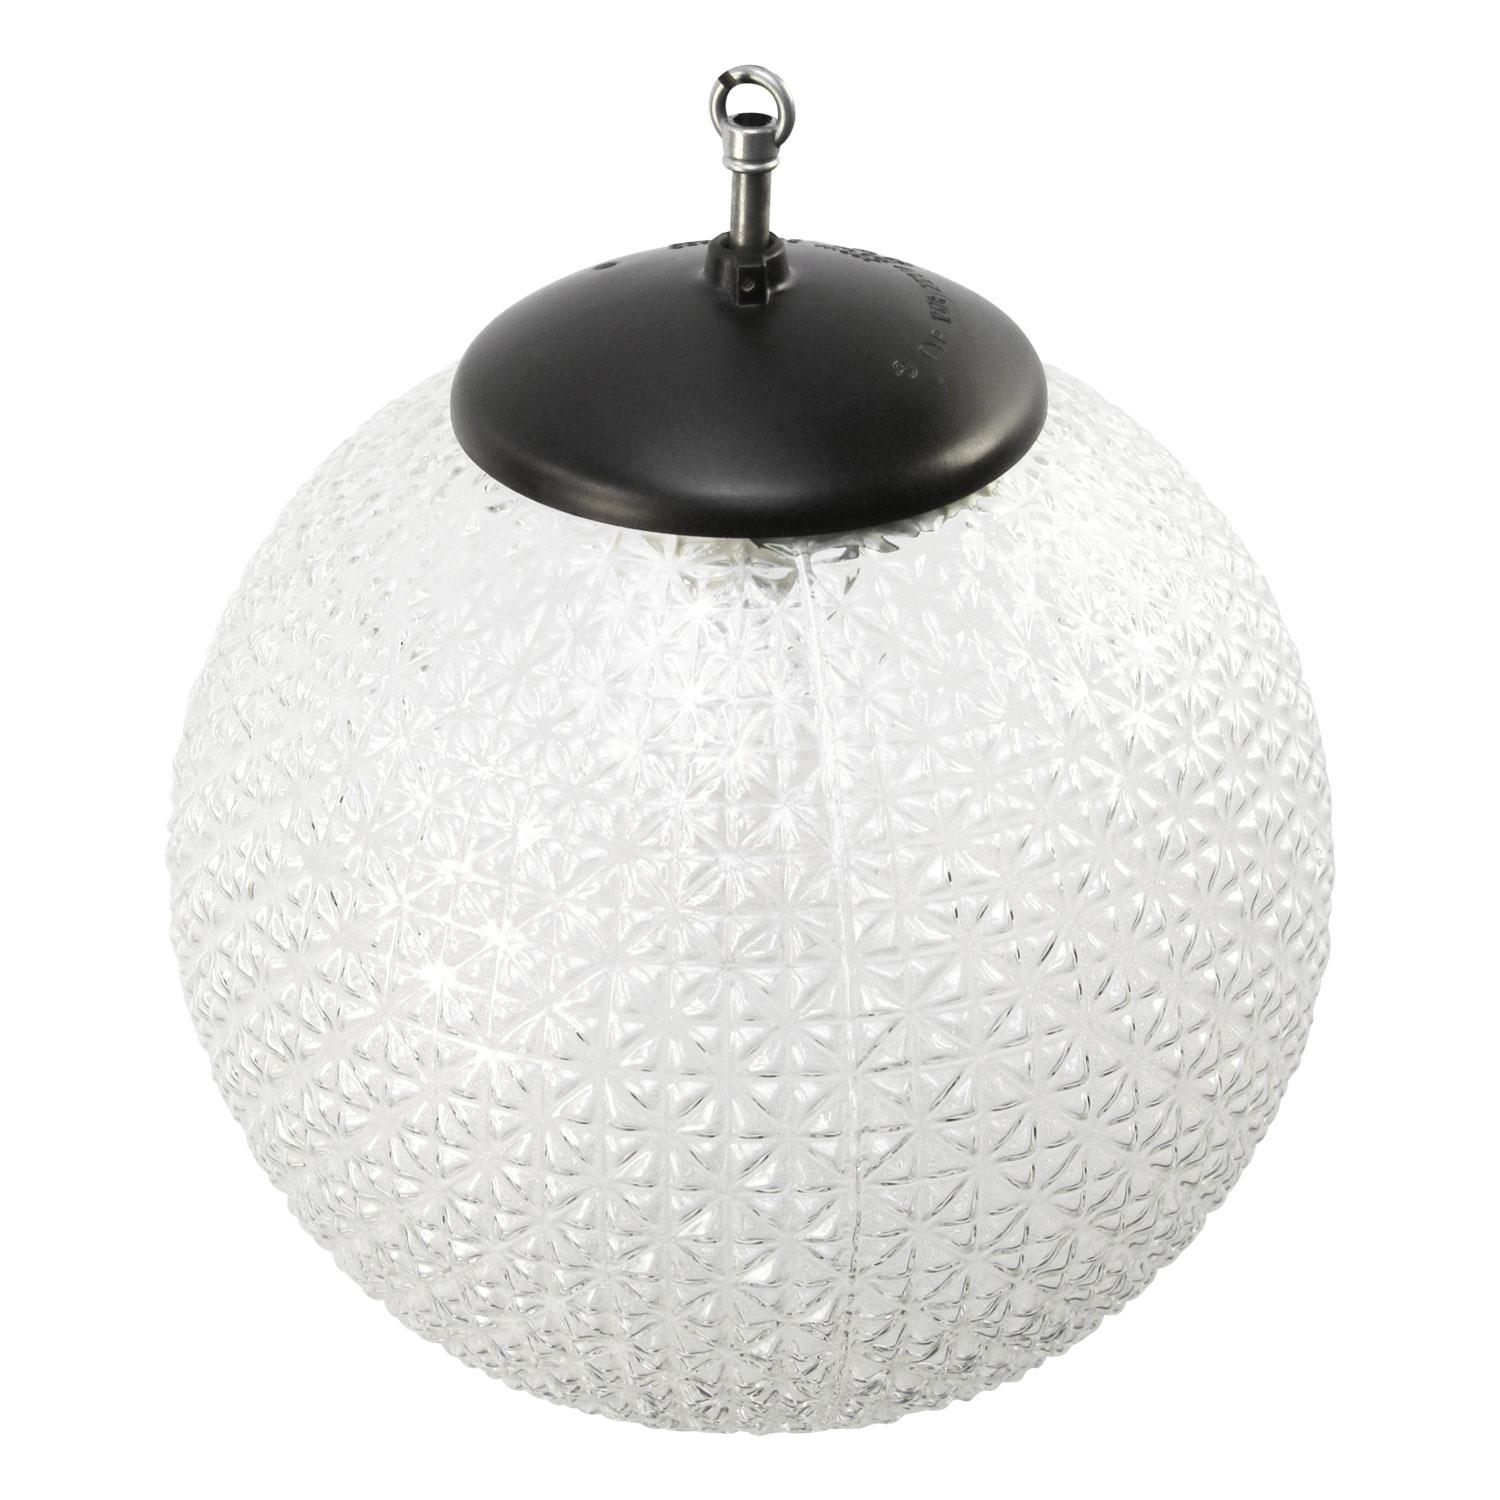 Clear texture globe glass pendant.

Weight: 2.80 kg / 6.2 lb

Priced per individual item. All lamps have been made suitable by international standards for incandescent light bulbs, energy-efficient and LED bulbs. E26/E27 bulb holders and new